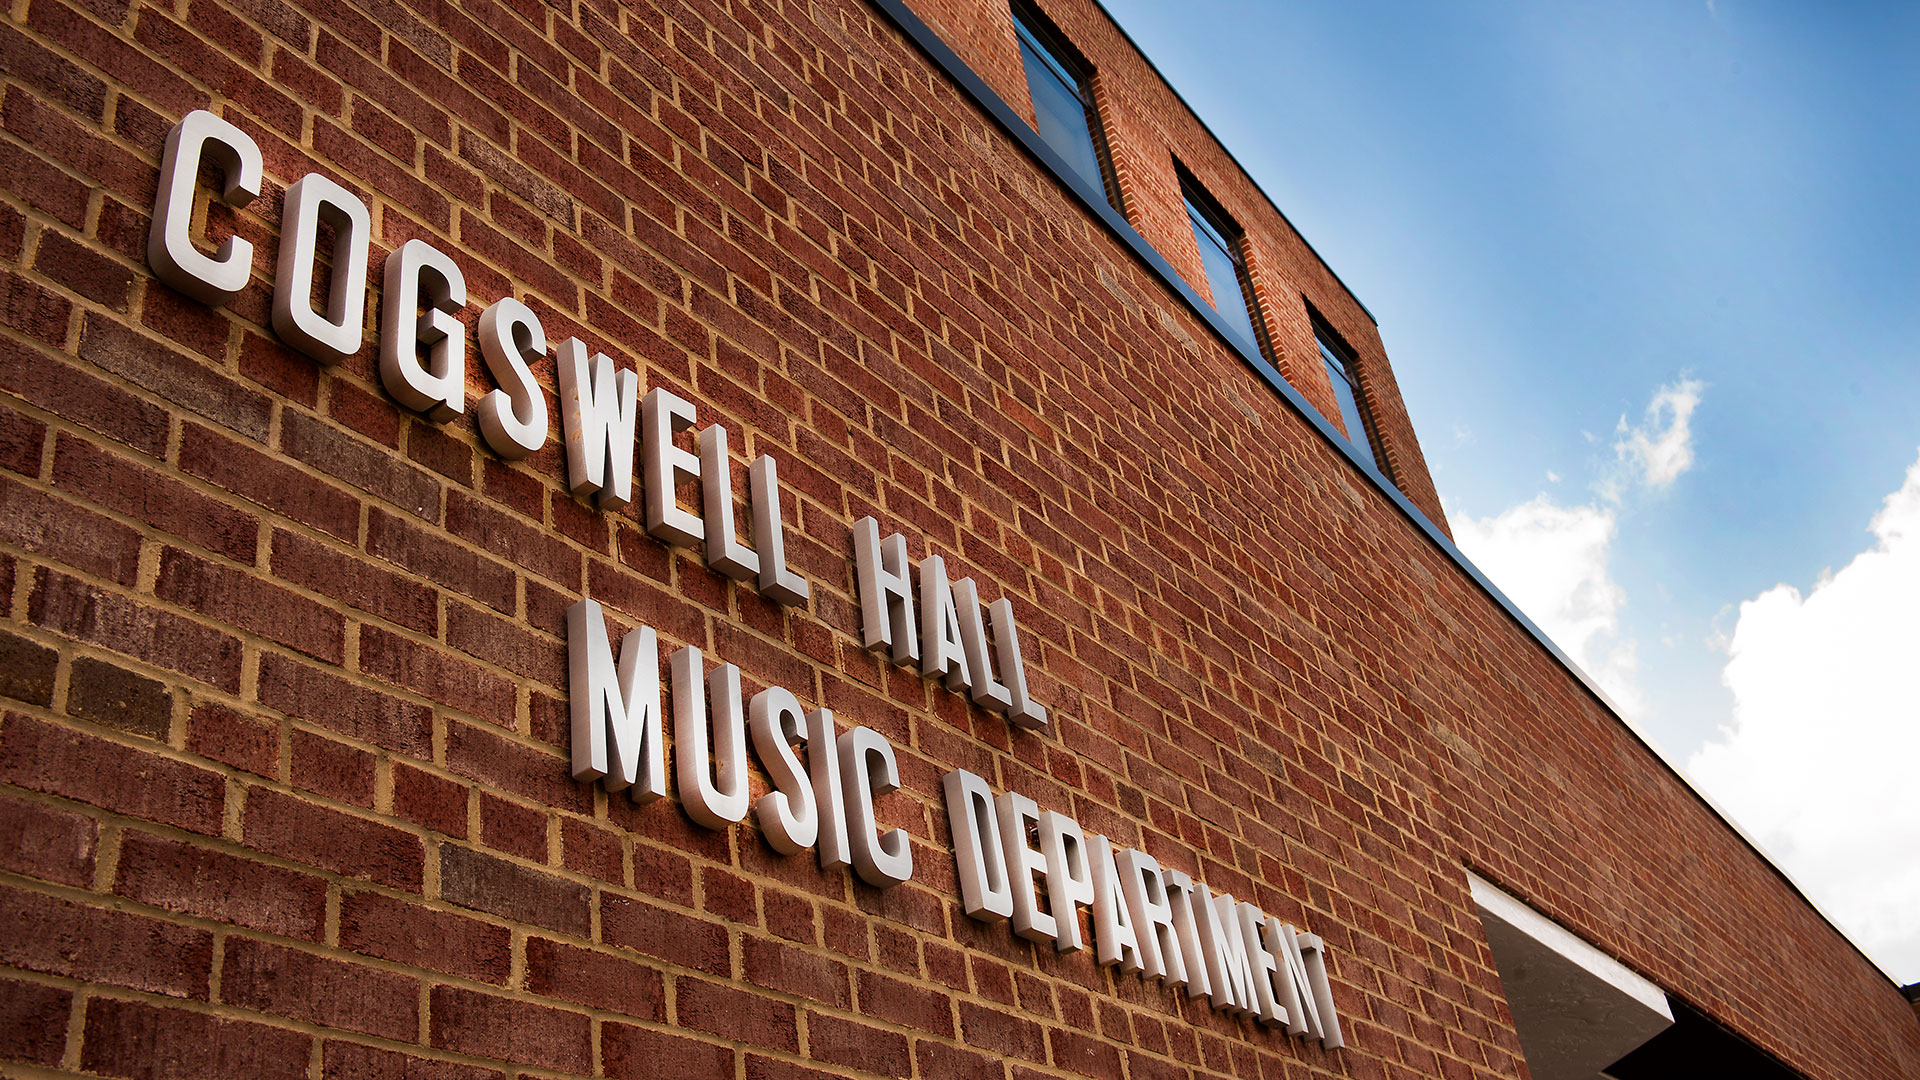 Cogswell Hall